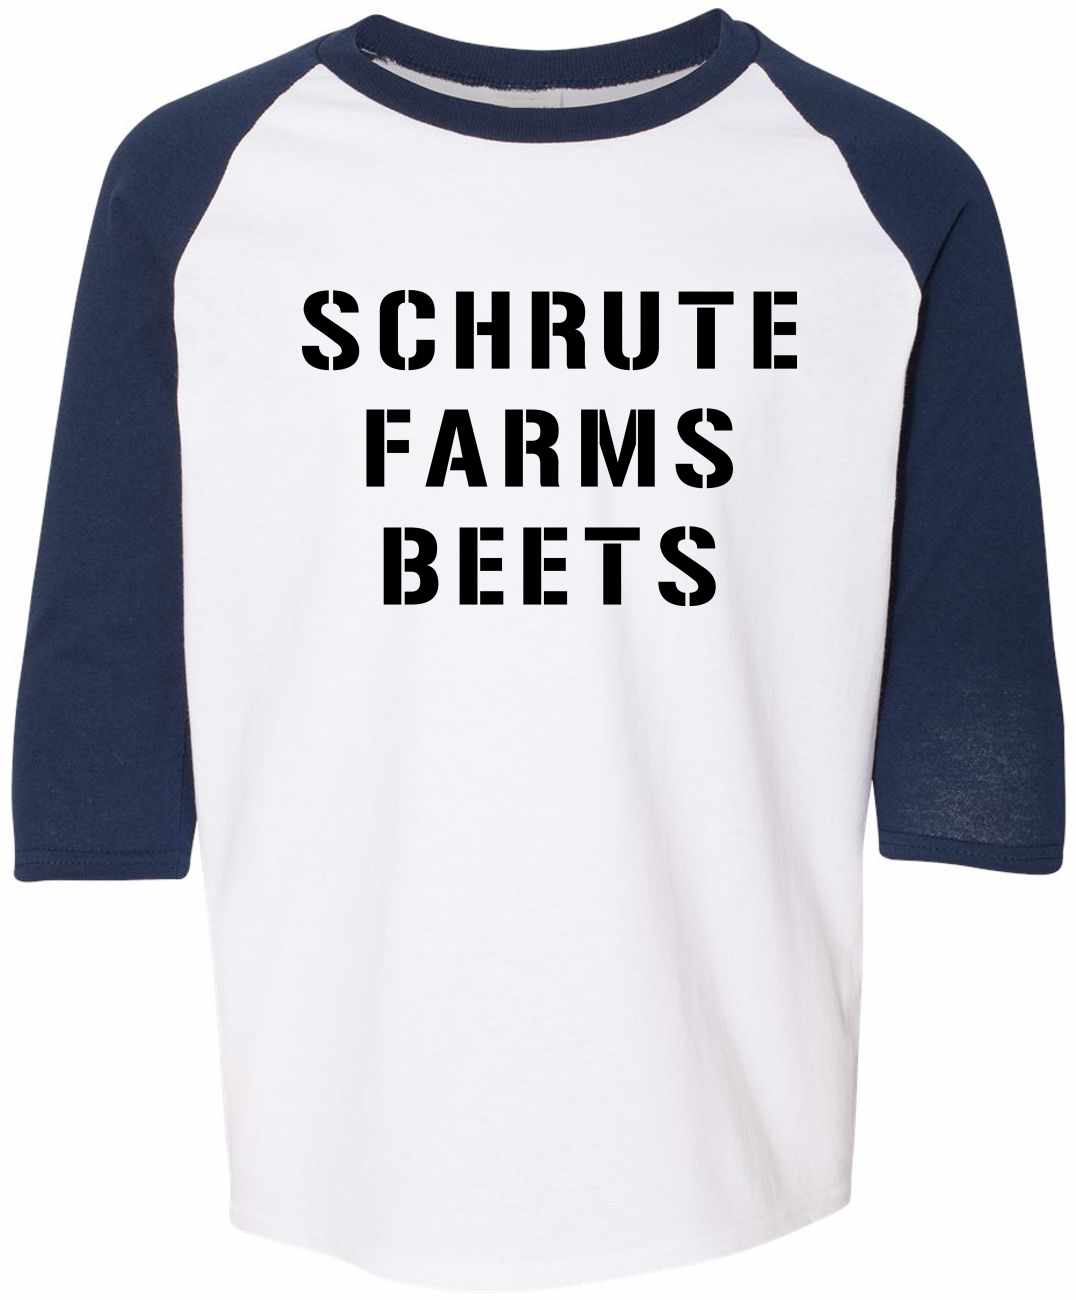 SCHRUTE FARMS BEETS on Youth Baseball Shirt (#396-212)